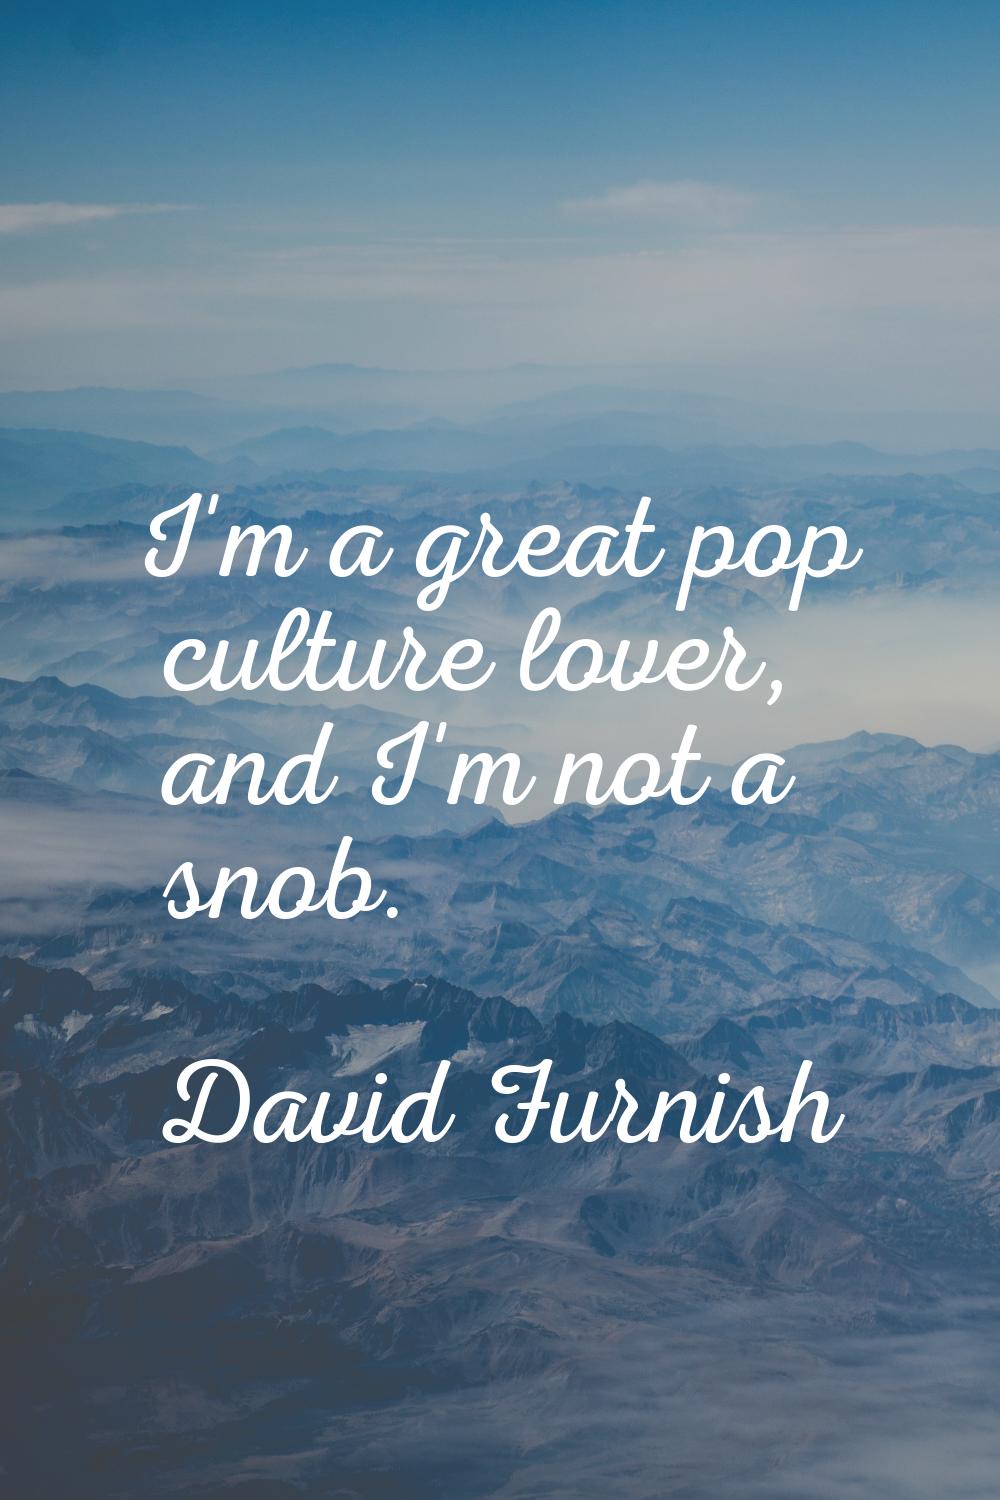 I'm a great pop culture lover, and I'm not a snob.